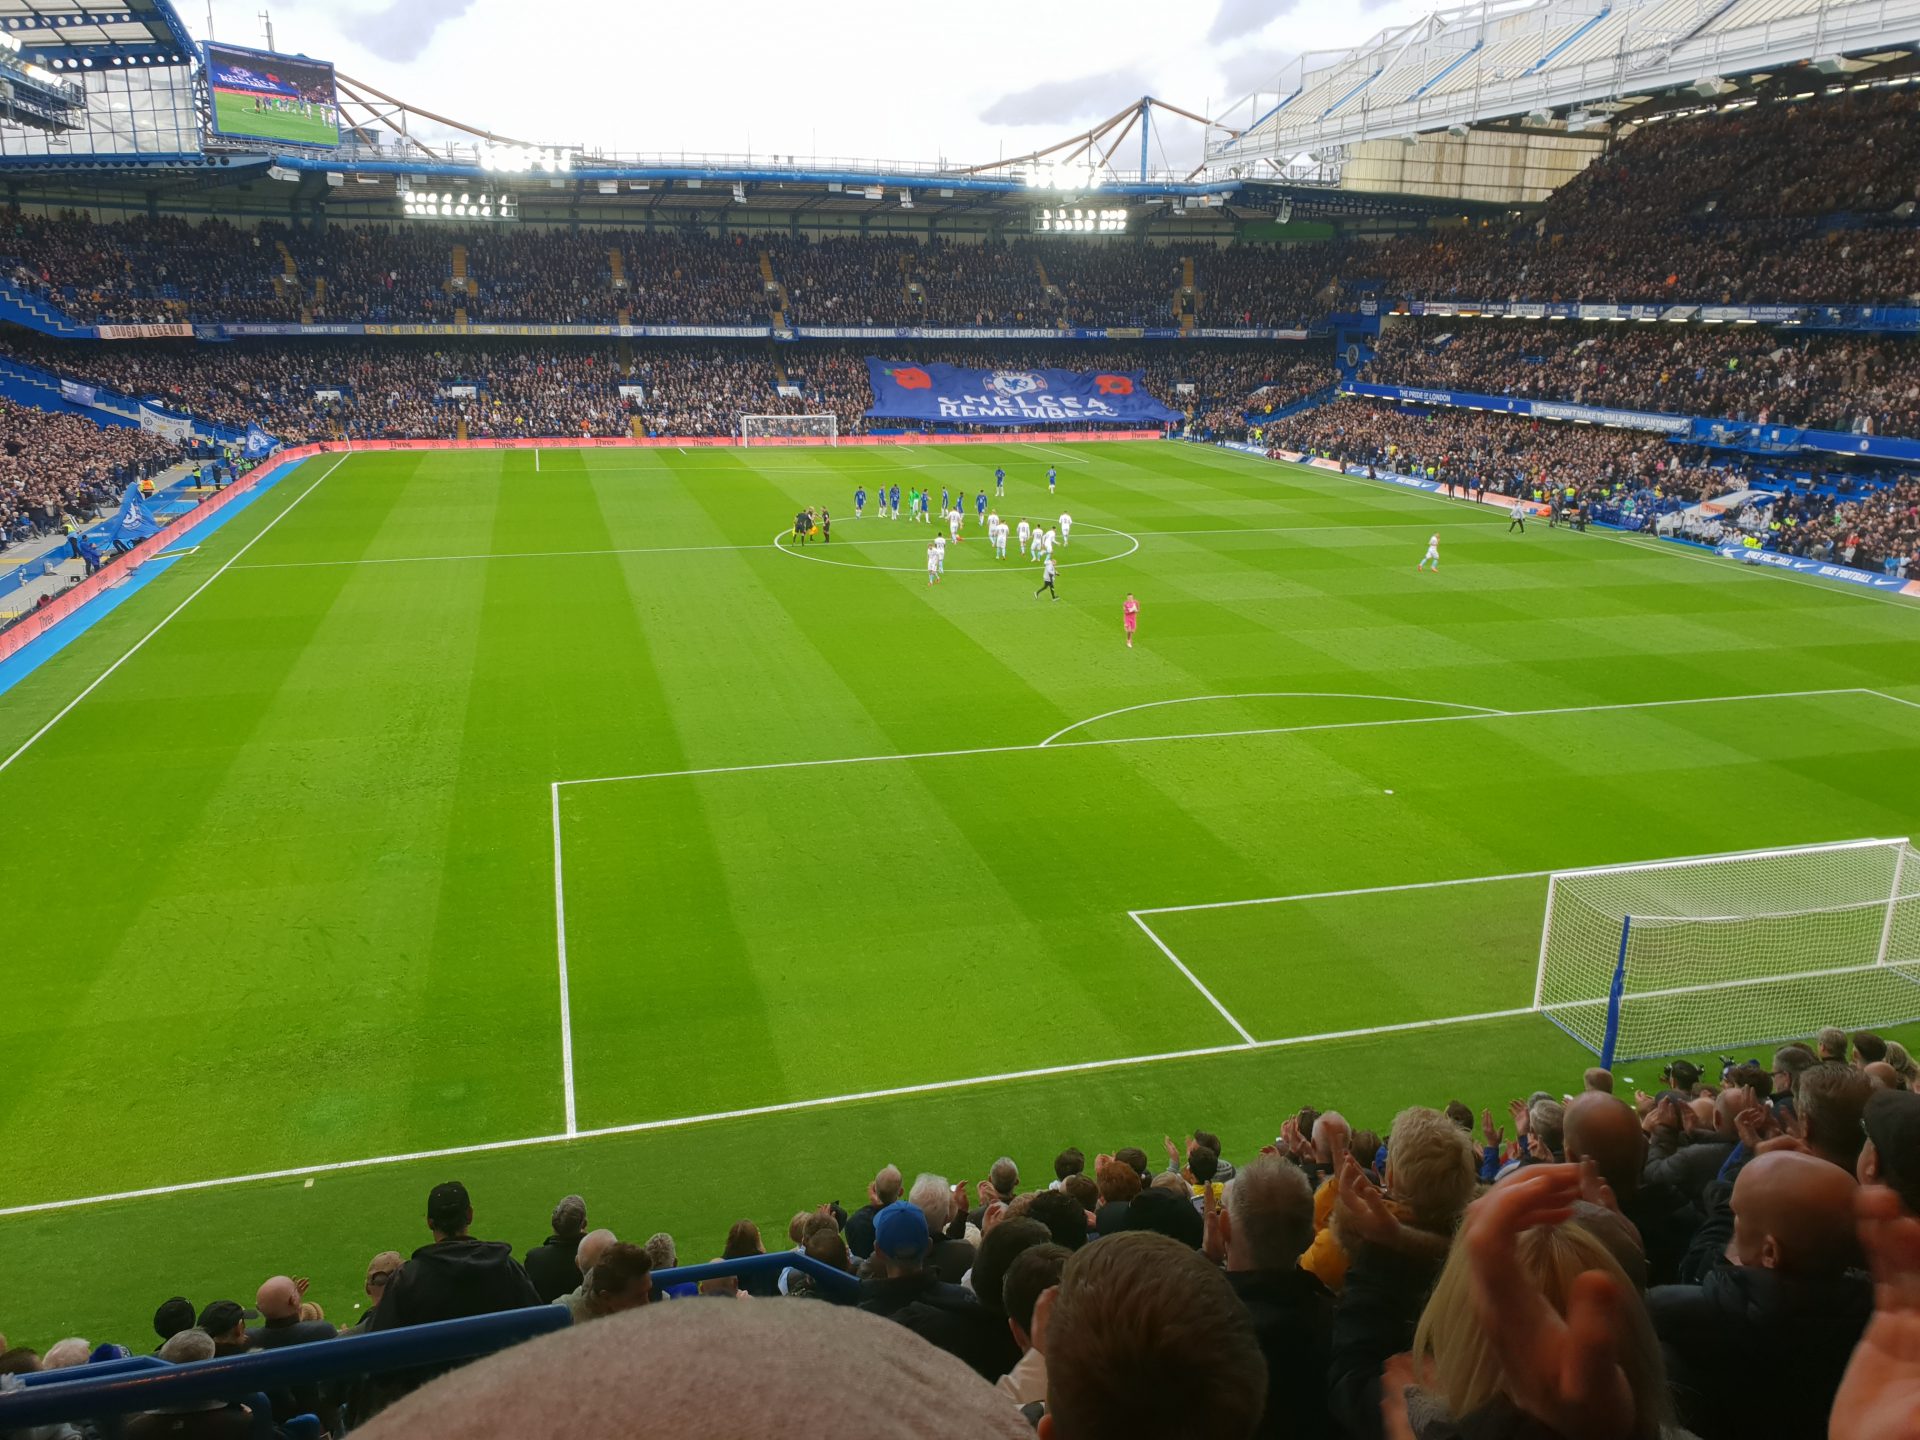 Will Return Of Standing At Stamford Bridge Boost The Atmosphere?